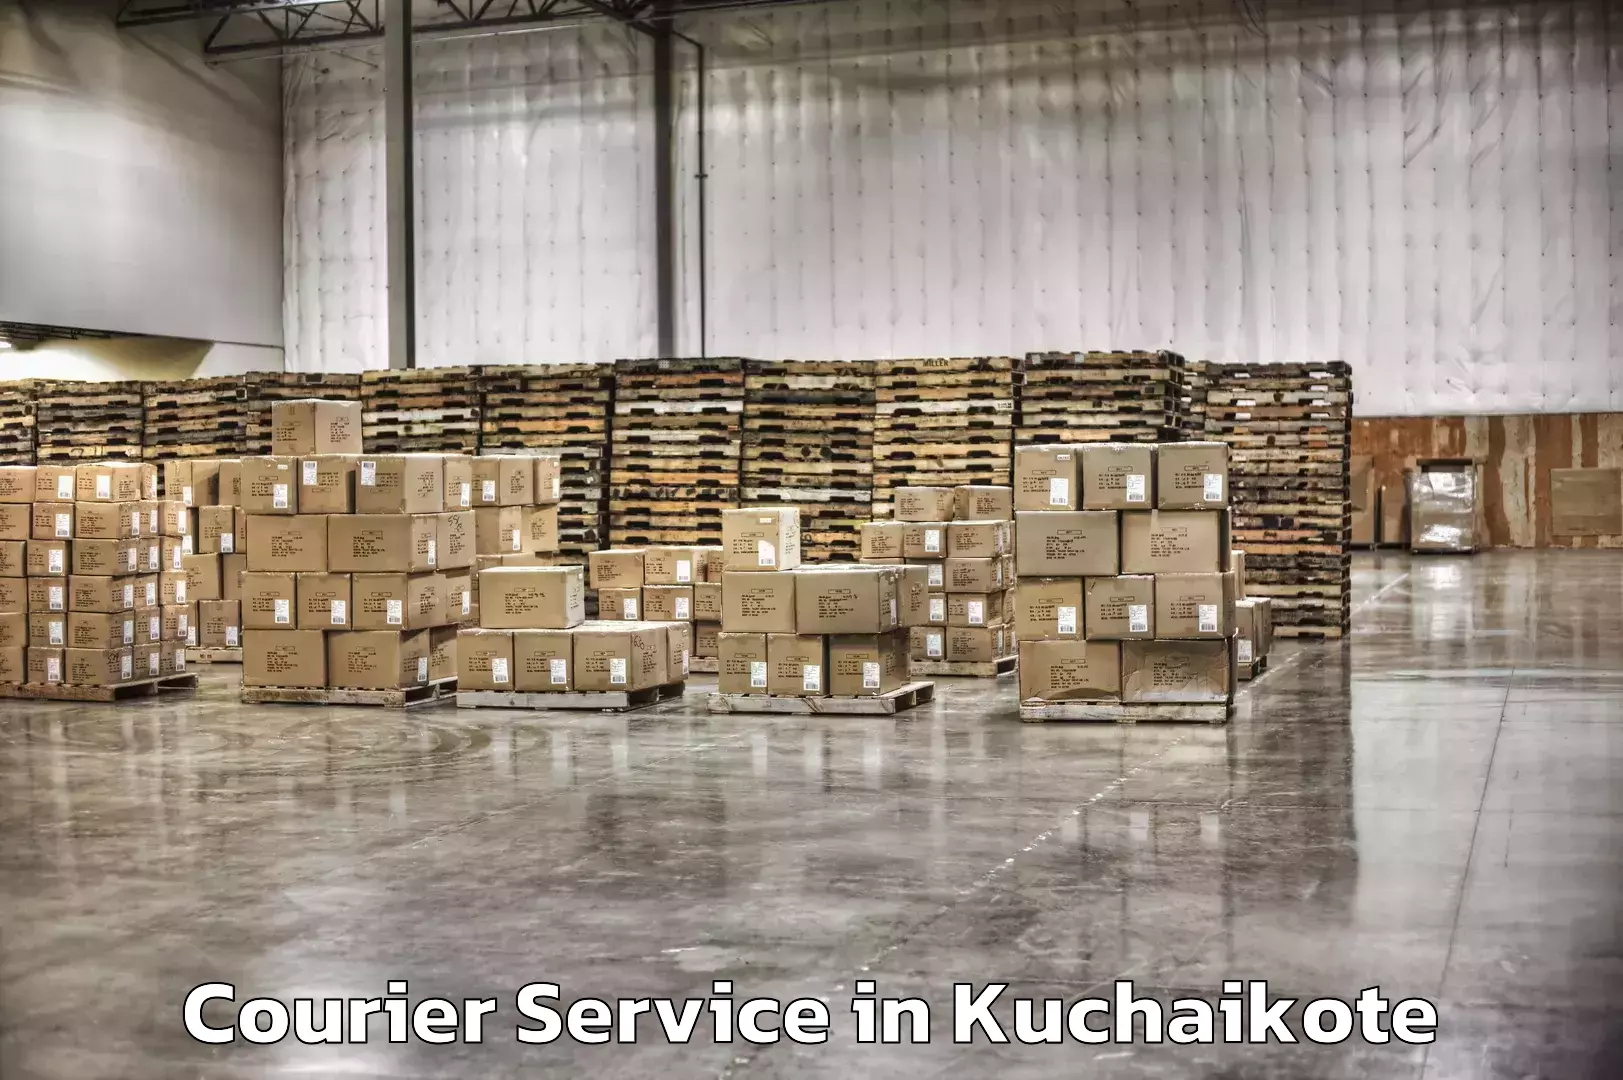 Local courier options in Kuchaikote